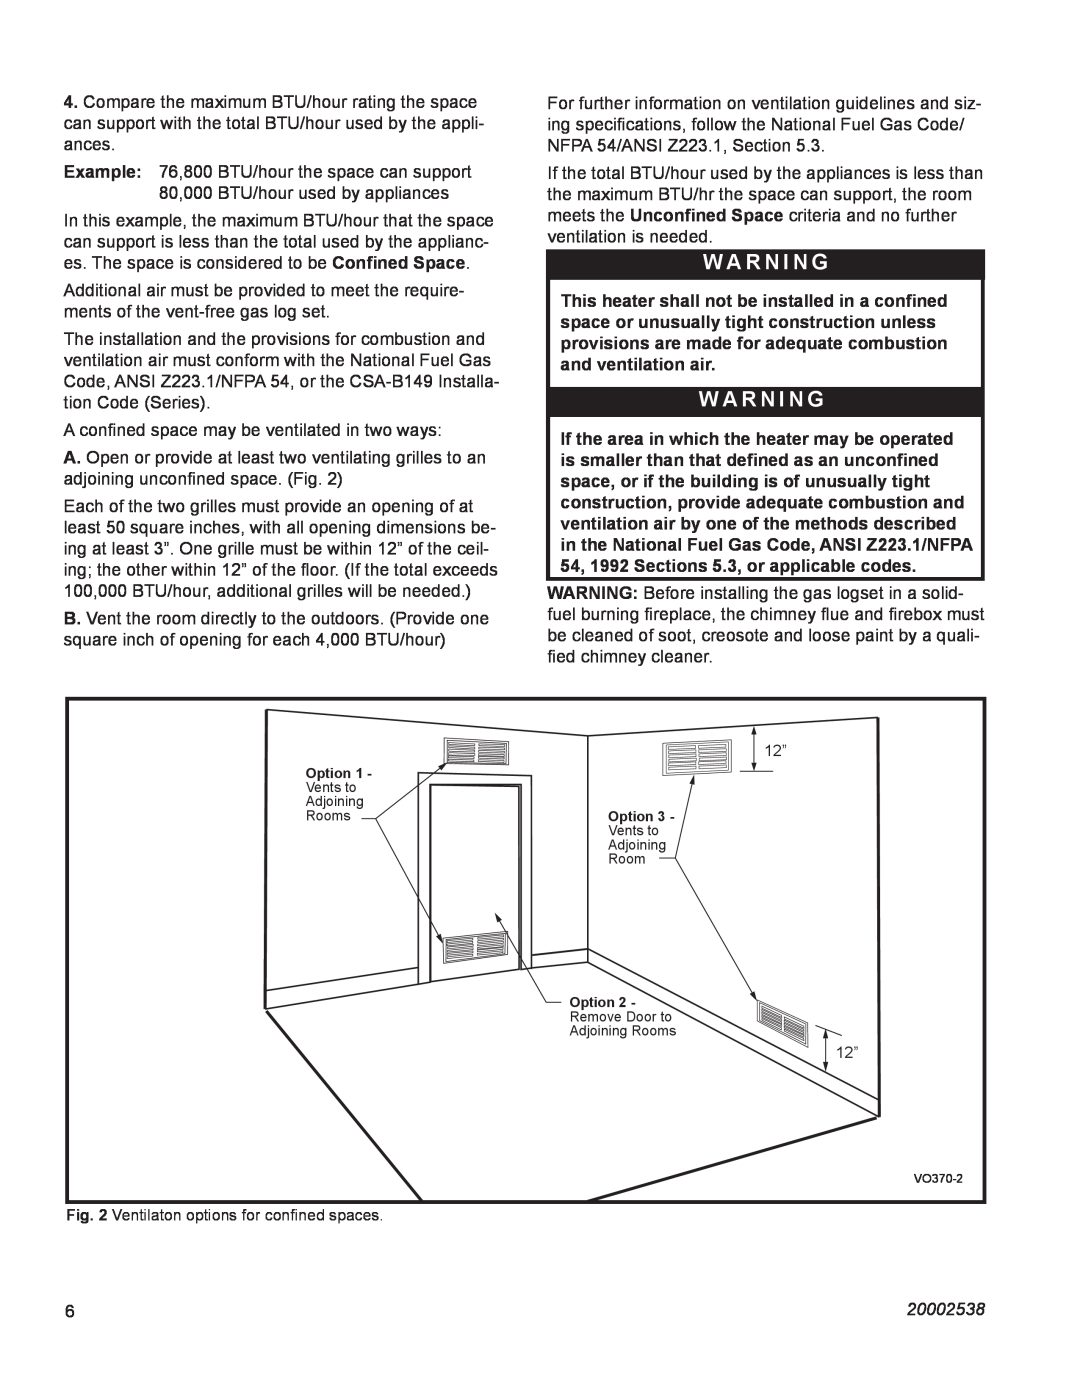 Vermont Casting VL24LP, VL18LP, VL21LP manual W A R N I N G, A conﬁned space may be ventilated in two ways, 20002538 